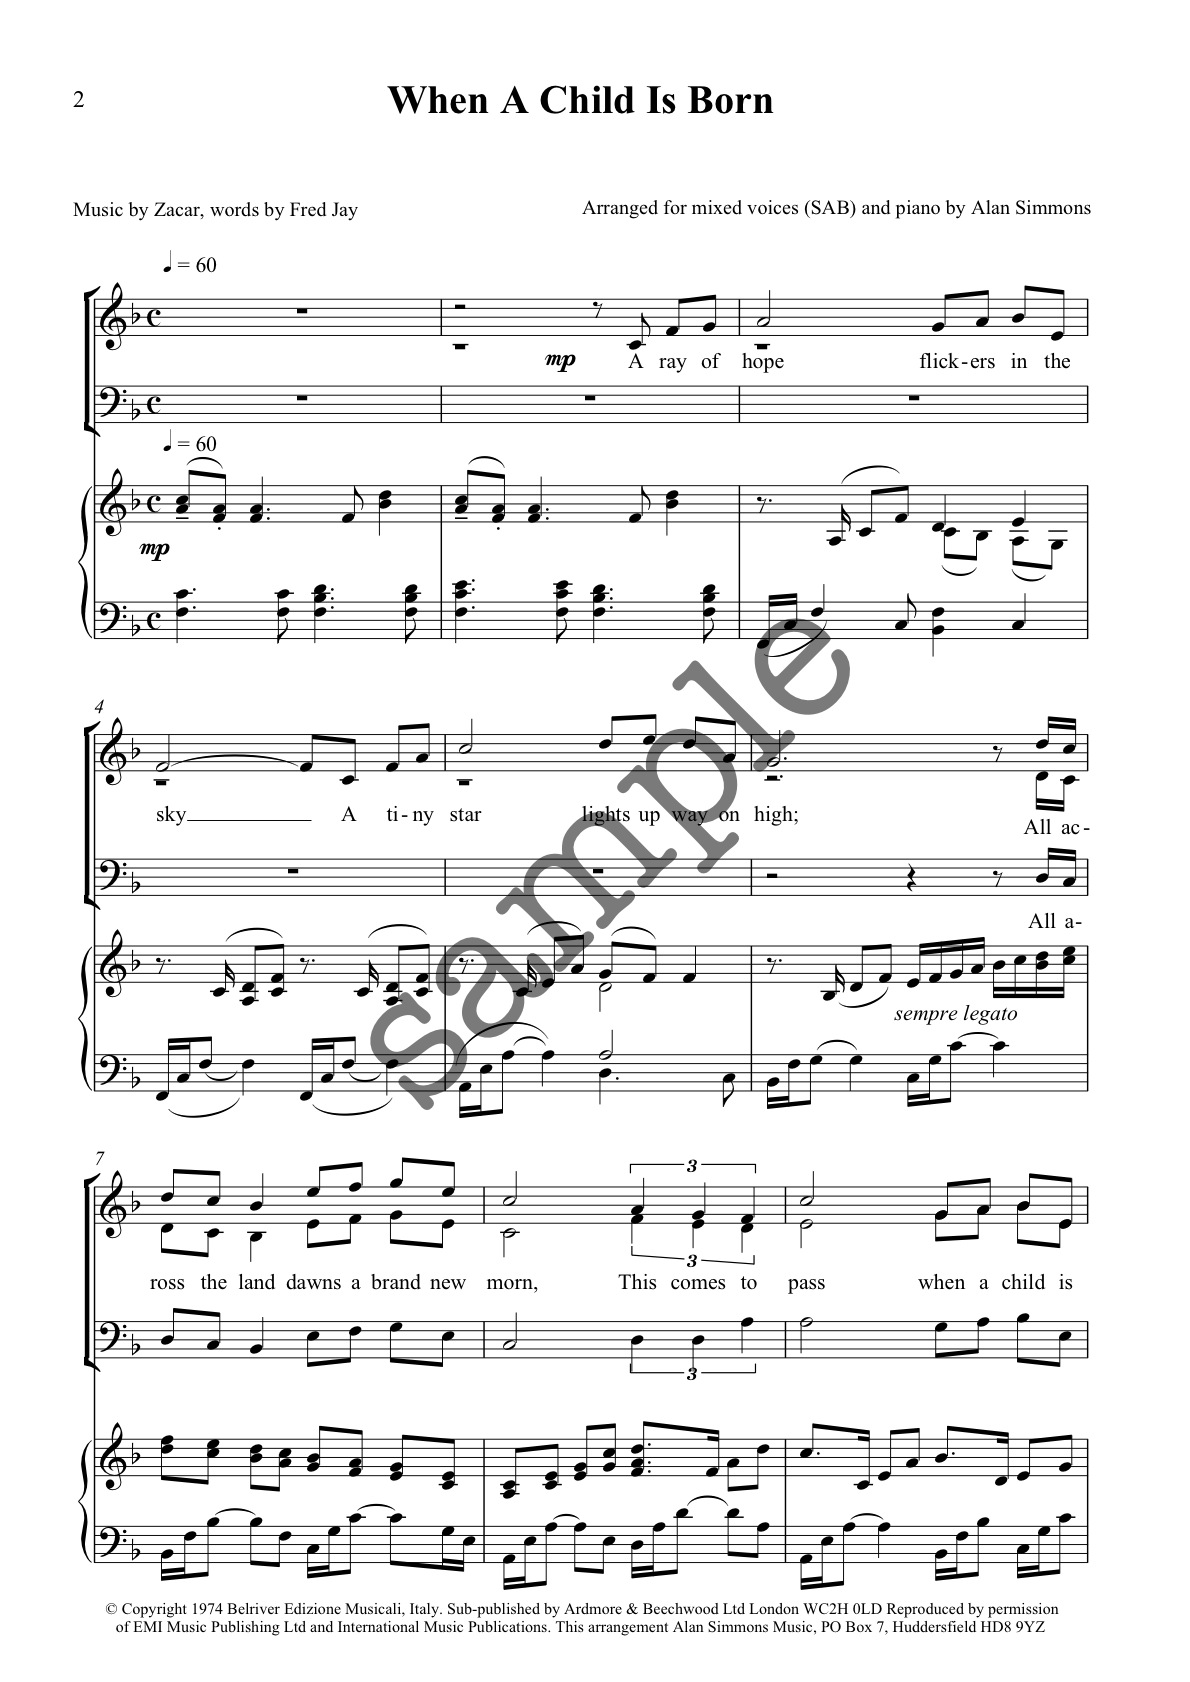 When a Child is Born - SAB - Alan Simmons Music - Choral Sheet Music for Choirs & Schools